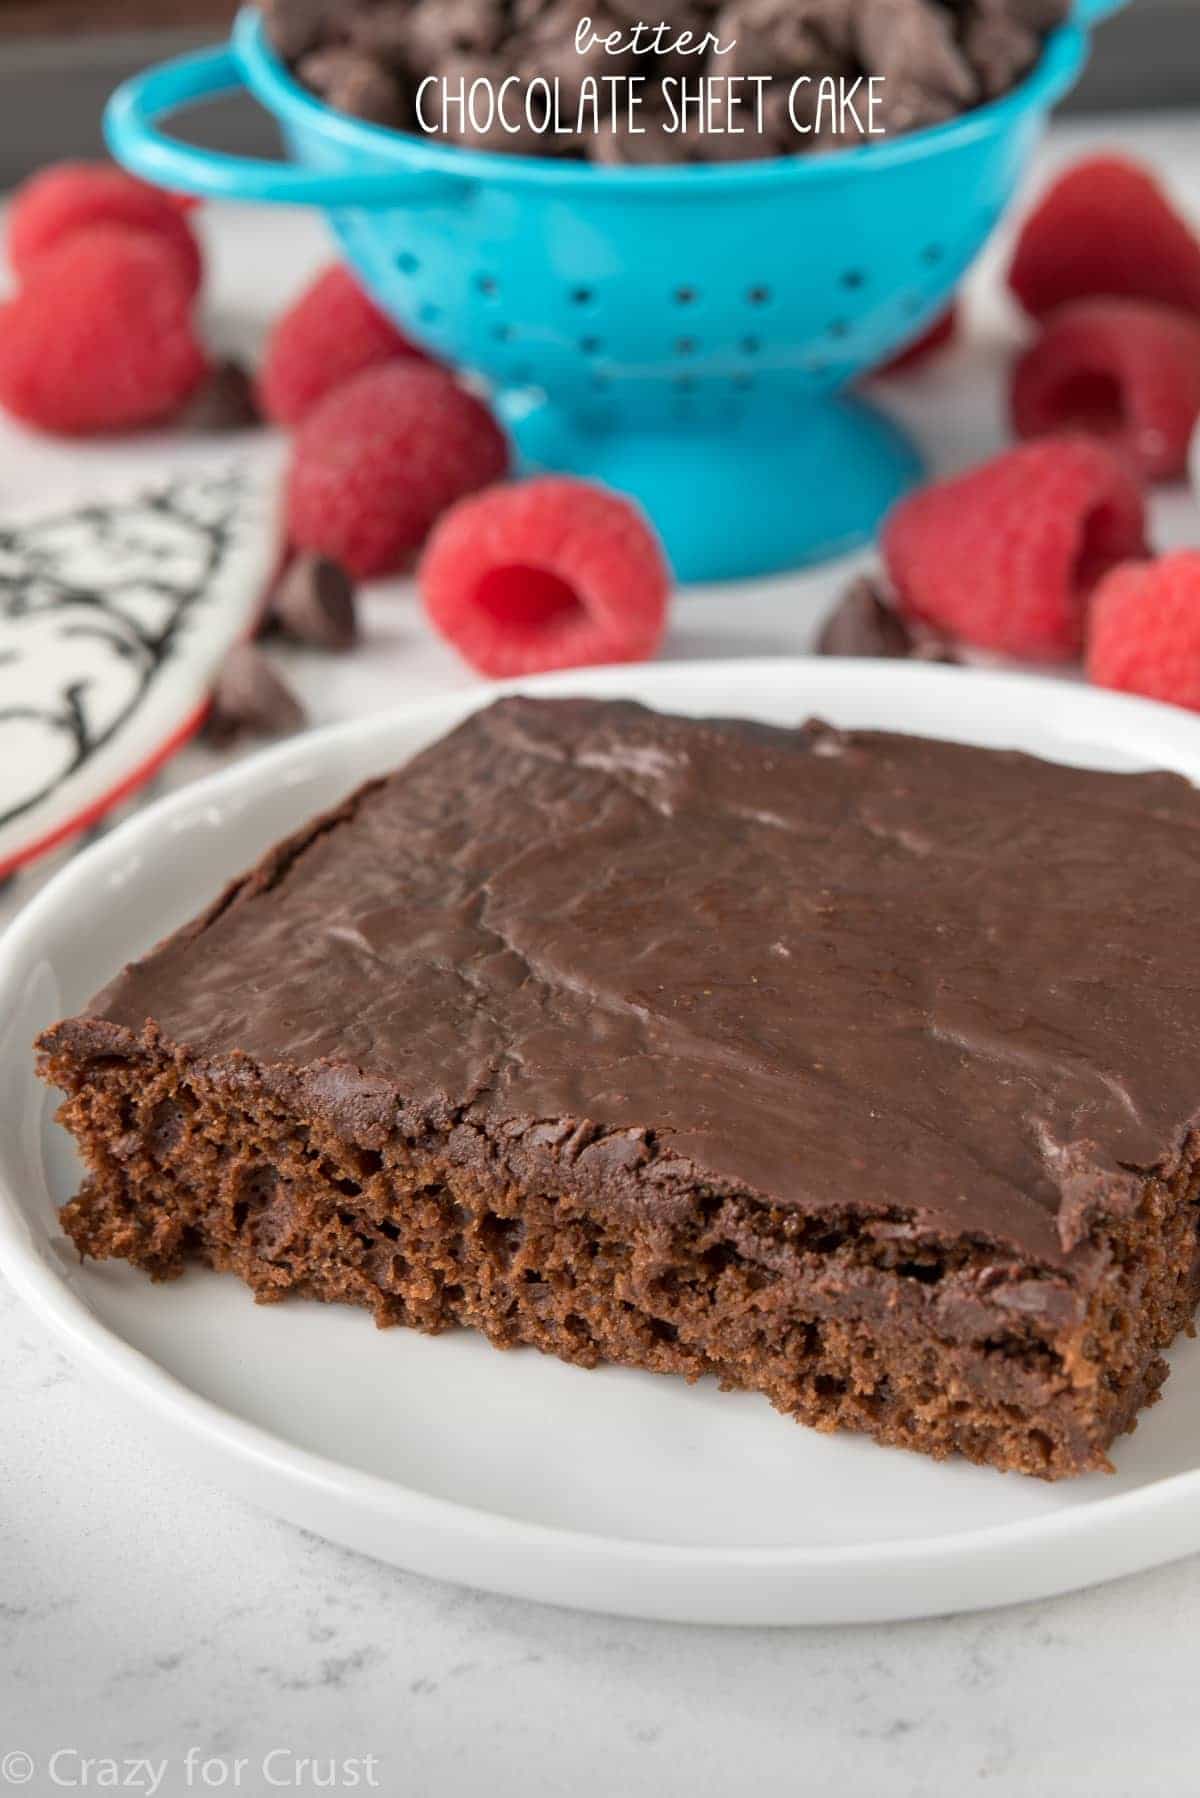 This is a Better Chocolate Sheet Cake Recipe! It's super chocolatey and moist but with NO eggs or oil! You MUST try this easy cake recipe!